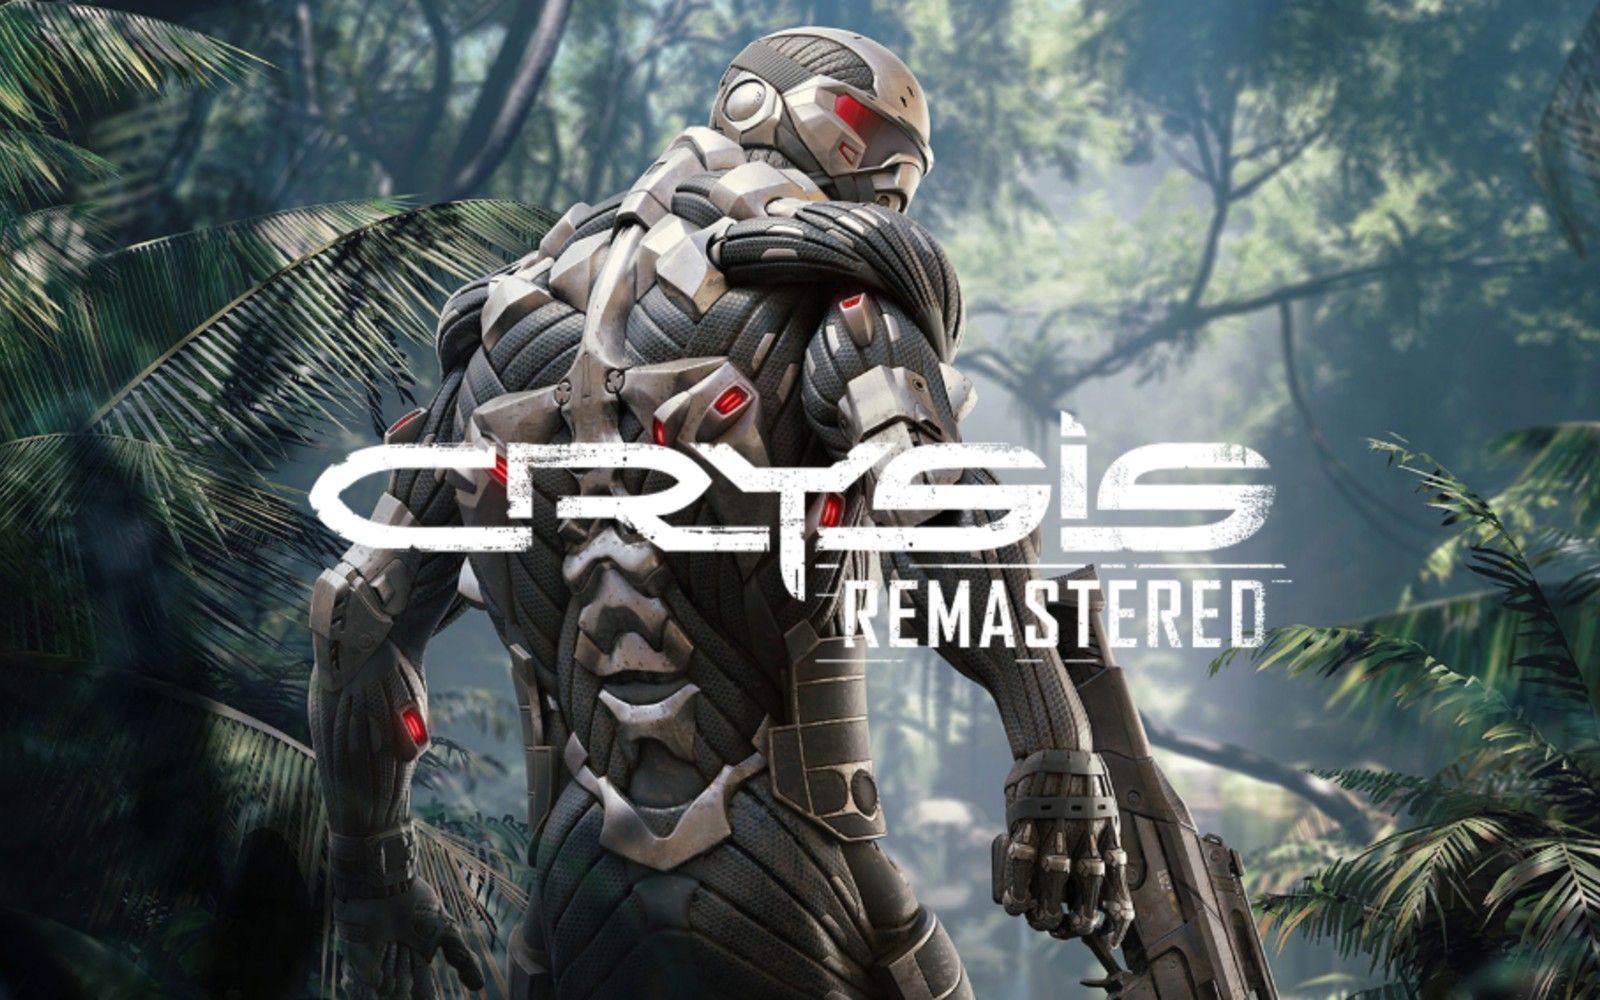 Crysis Remastered' is coming to PC, PS Xbox One and Switch